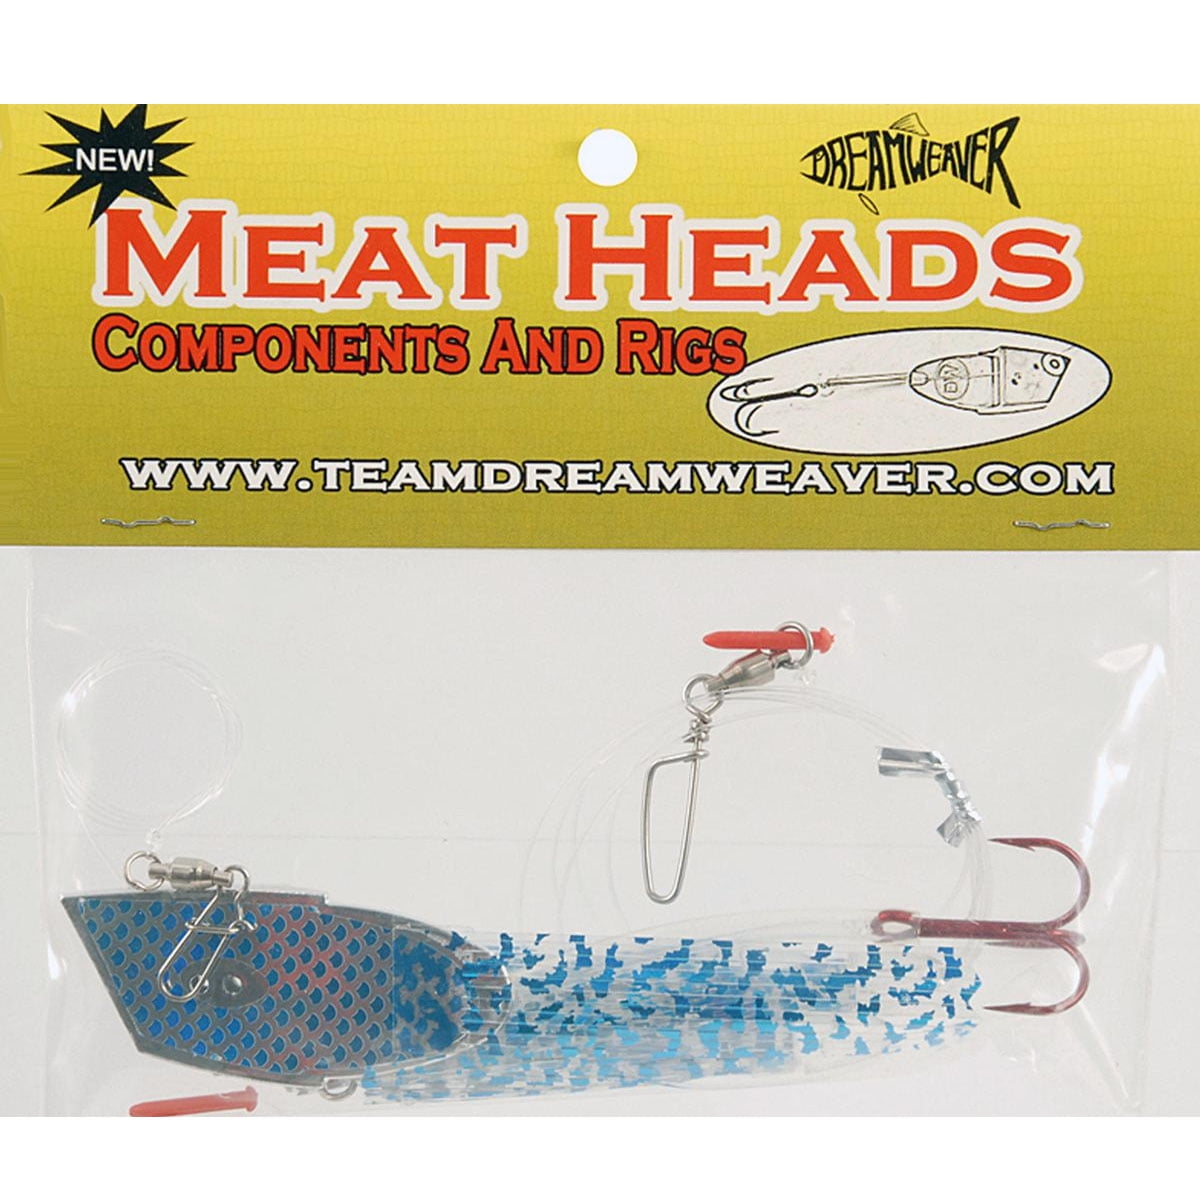  Fishing Leaders with Swivels, Fishing Line Leader, Fishing  Wire Leader, Fishing Leaders Saltwater, Terminal Tackle, Fishing Tackle  Fishing Supplies, Saltwater Fishing Gear and Equipment : Sports & Outdoors